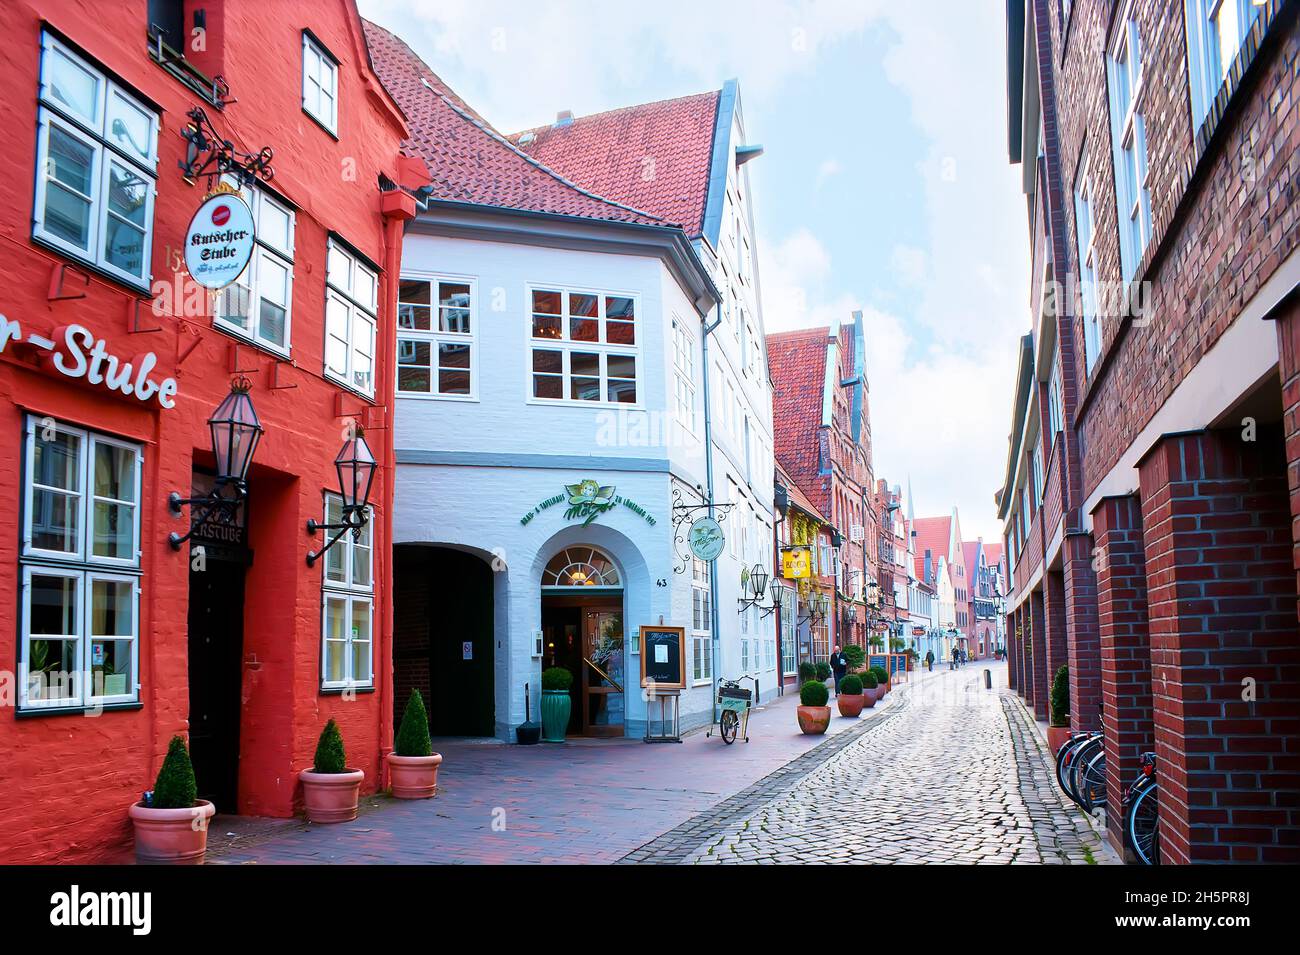 LUNEBURG, GERMANY - NOVEMBER 20, 2019: Medieval narrow street in Altstadt with cafes and restaurnats, on November 20 in Luneburg, Germany Stock Photo